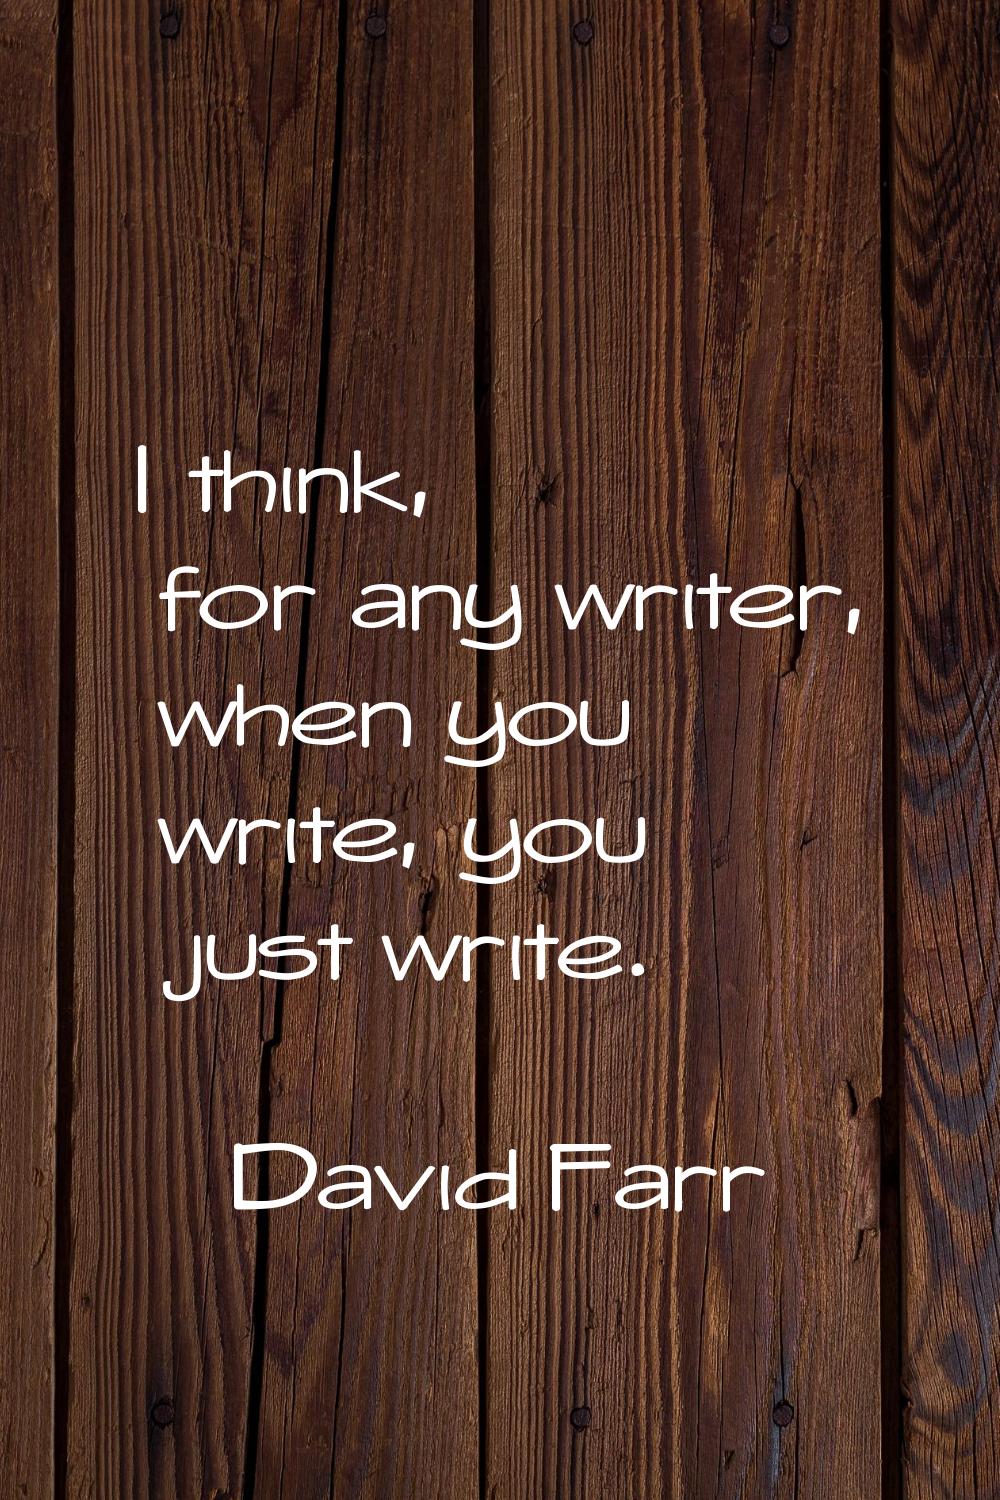 I think, for any writer, when you write, you just write.